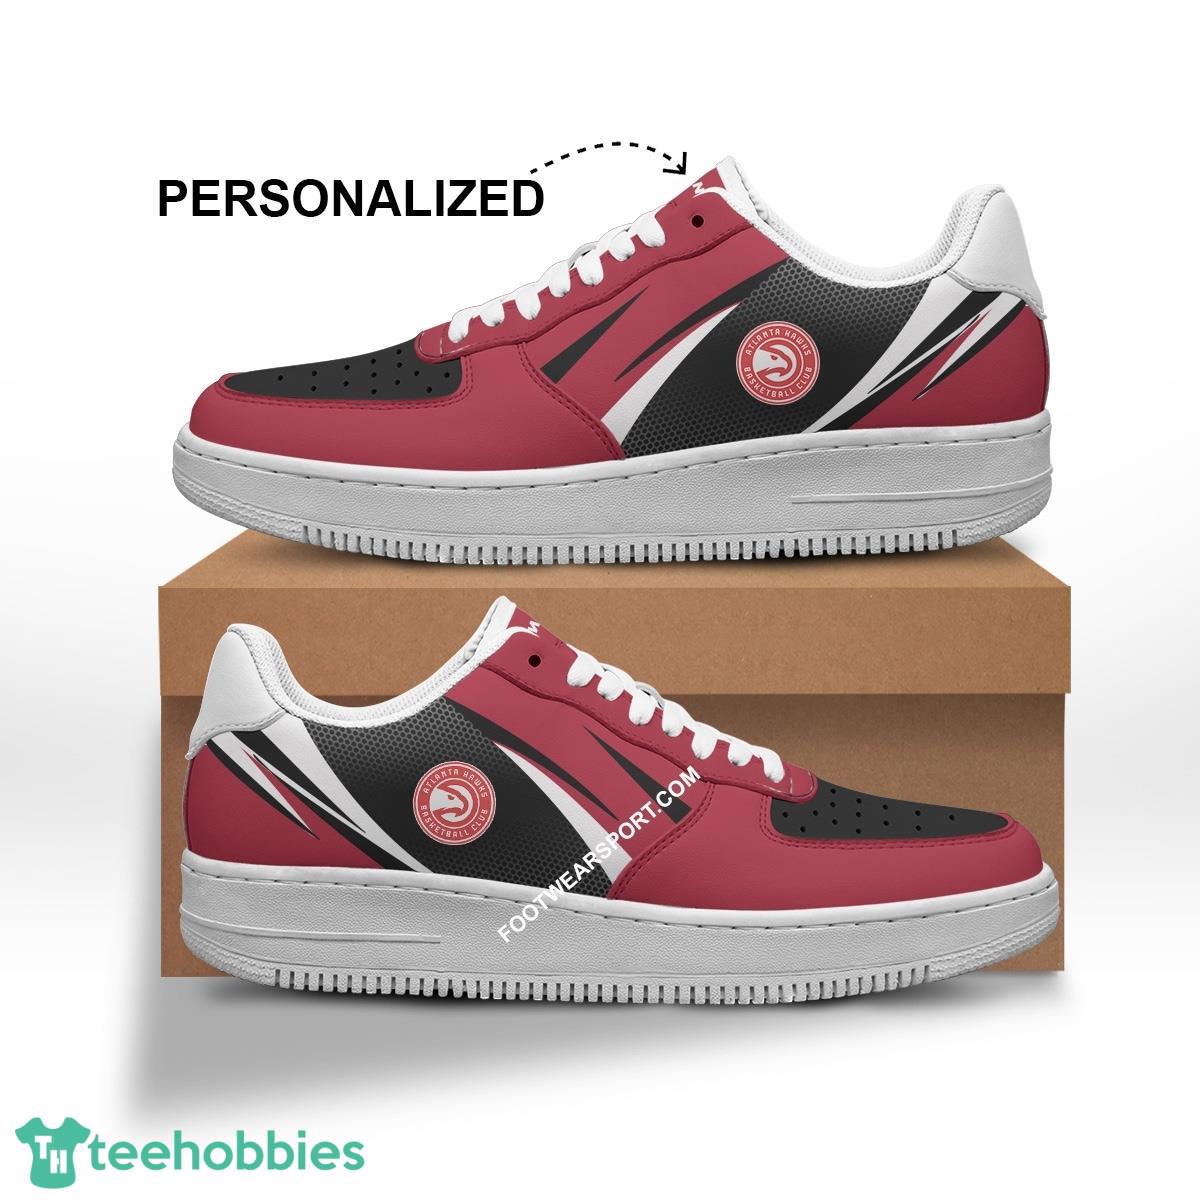 Custom Name Atlanta Hawks Air Force 1 Shoes Trending Design For Big Fans - NBA Atlanta Hawks Air Force 1 Shoes Personalized Style 1